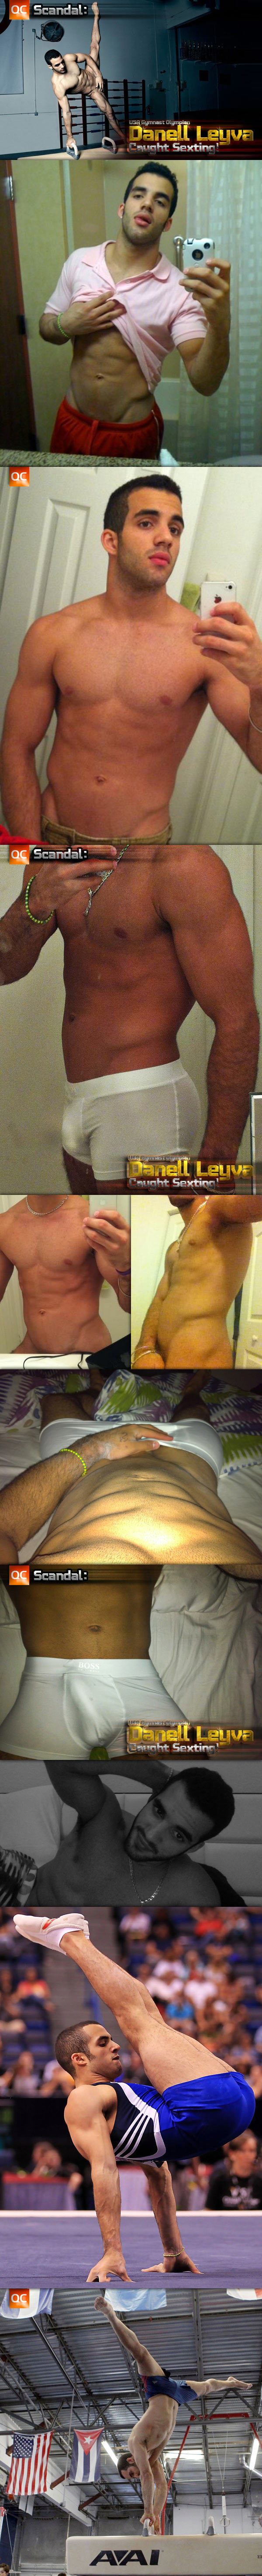 scandal-usa_gymnast_olympian_danell_leyva_sexting-collage_updt01